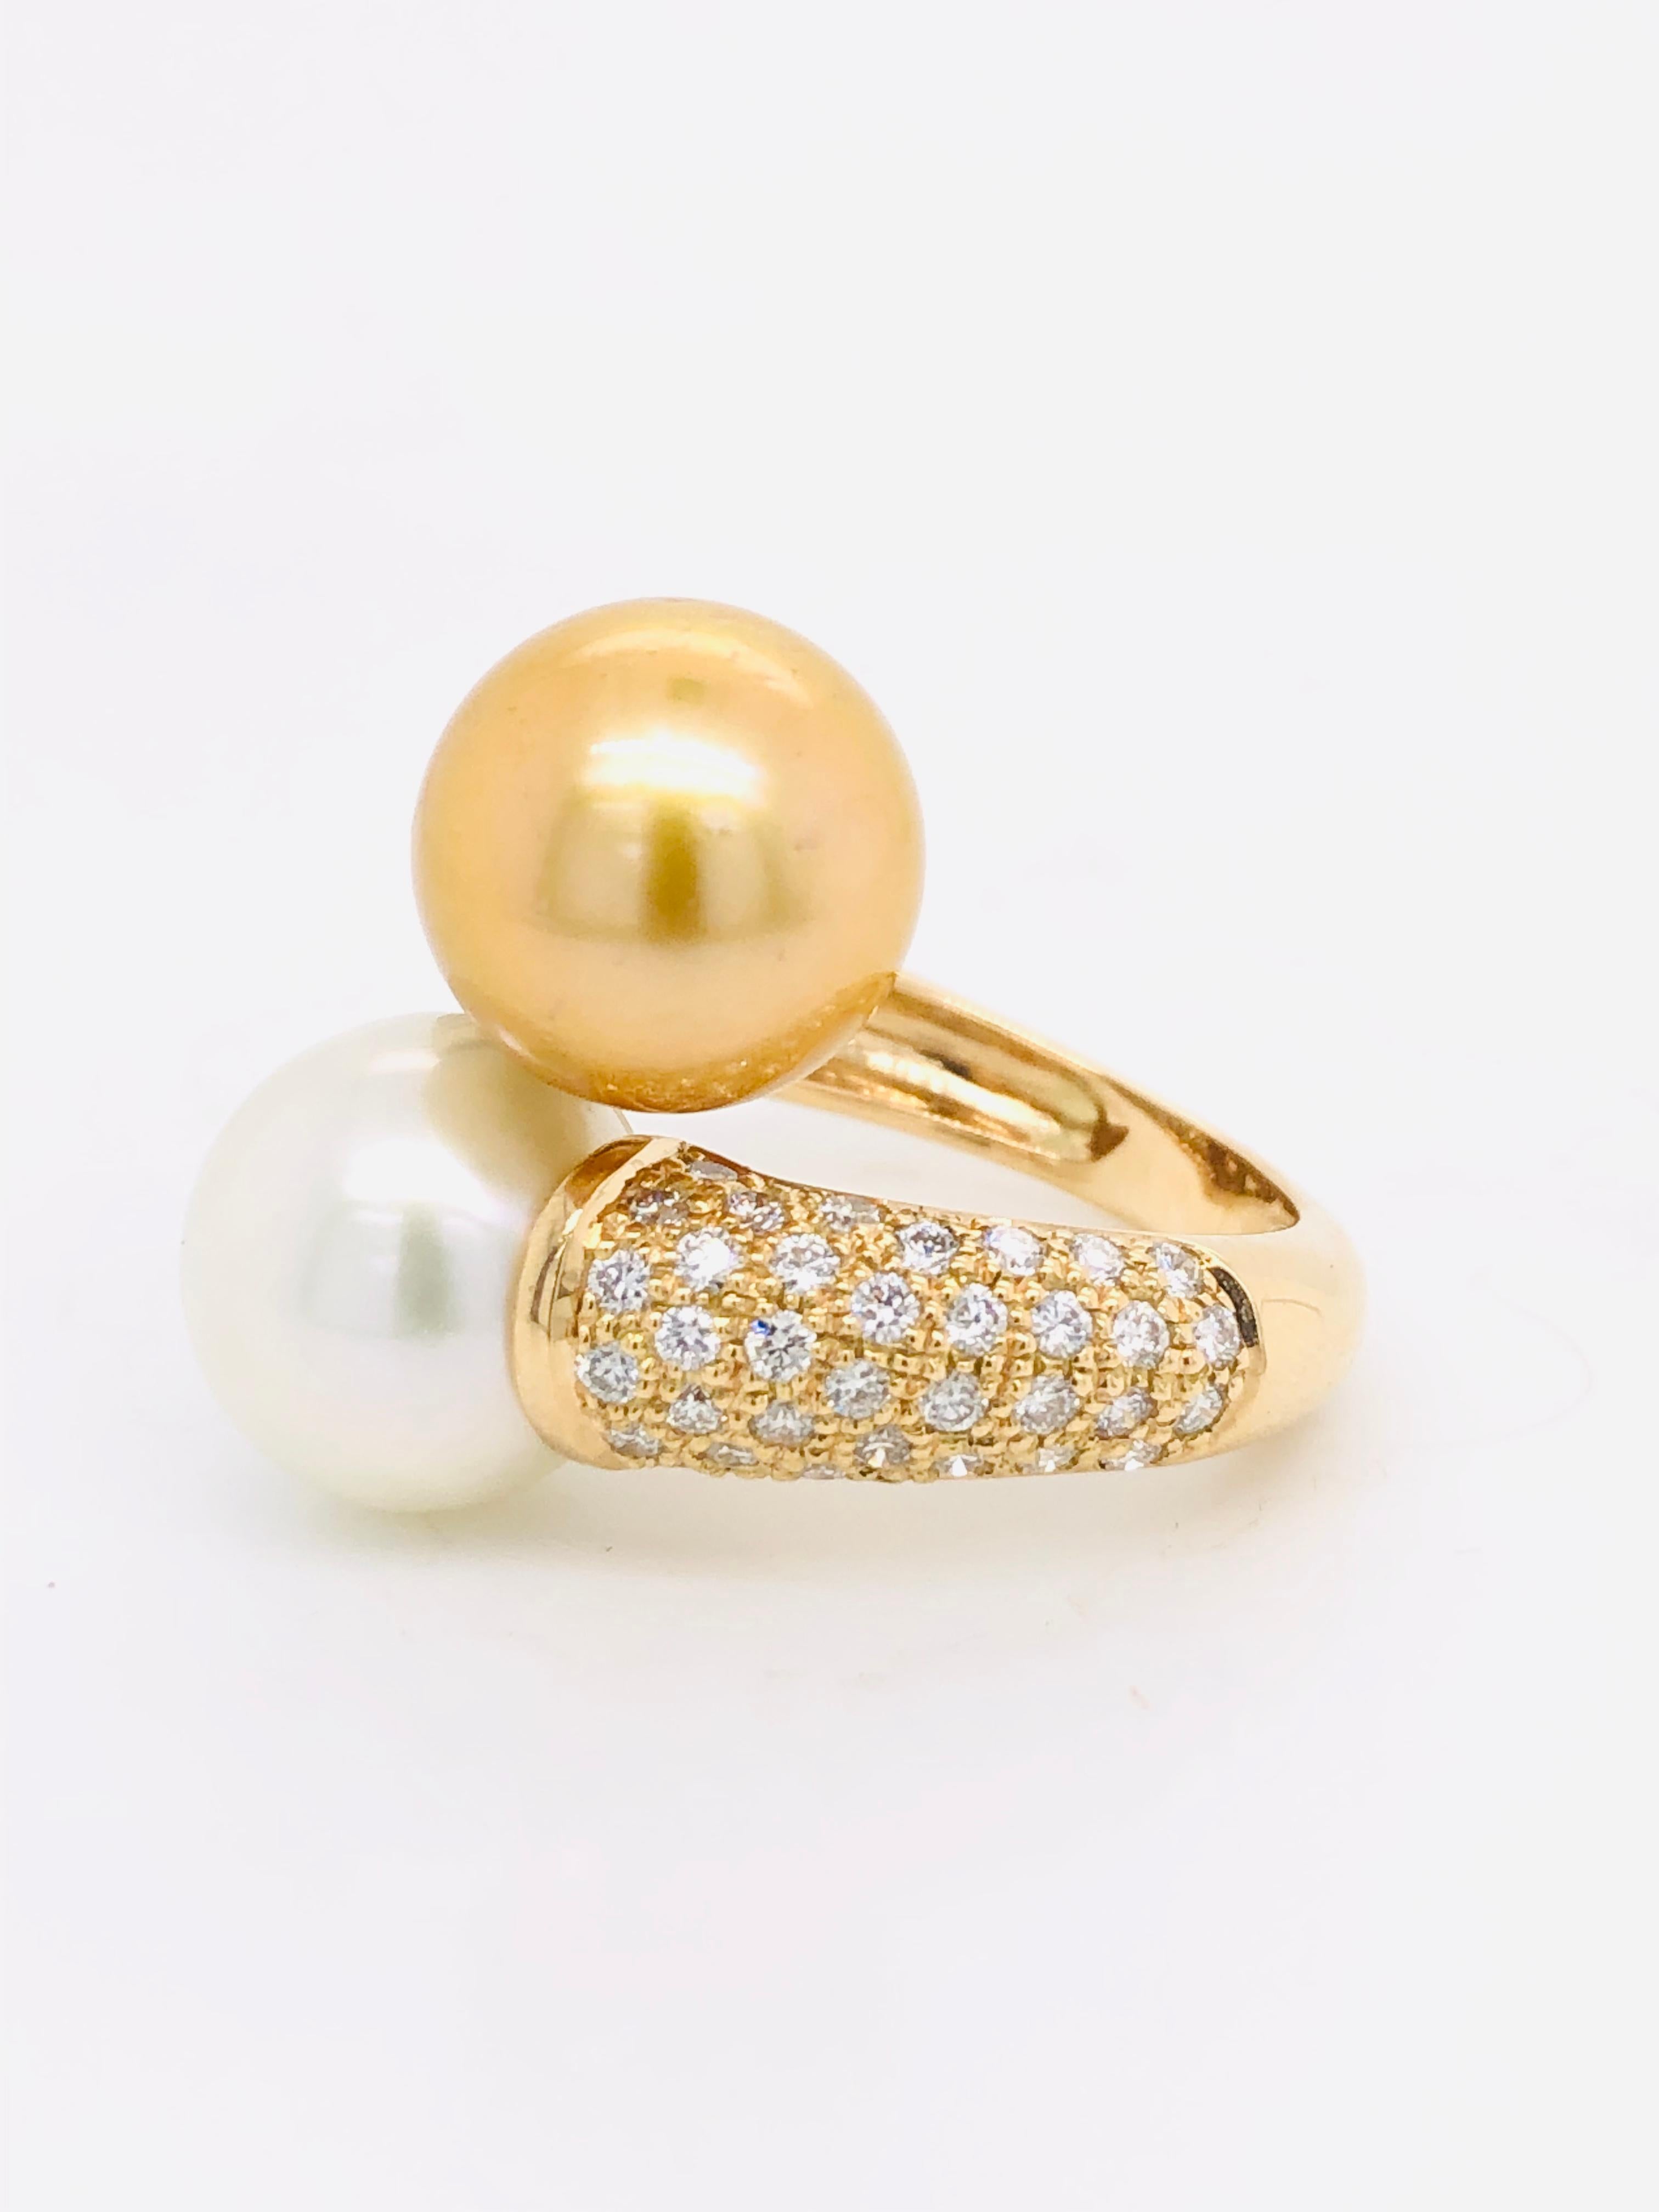 South Sea Pearls with White Diamonds on Gold 18 Carat Ring 1